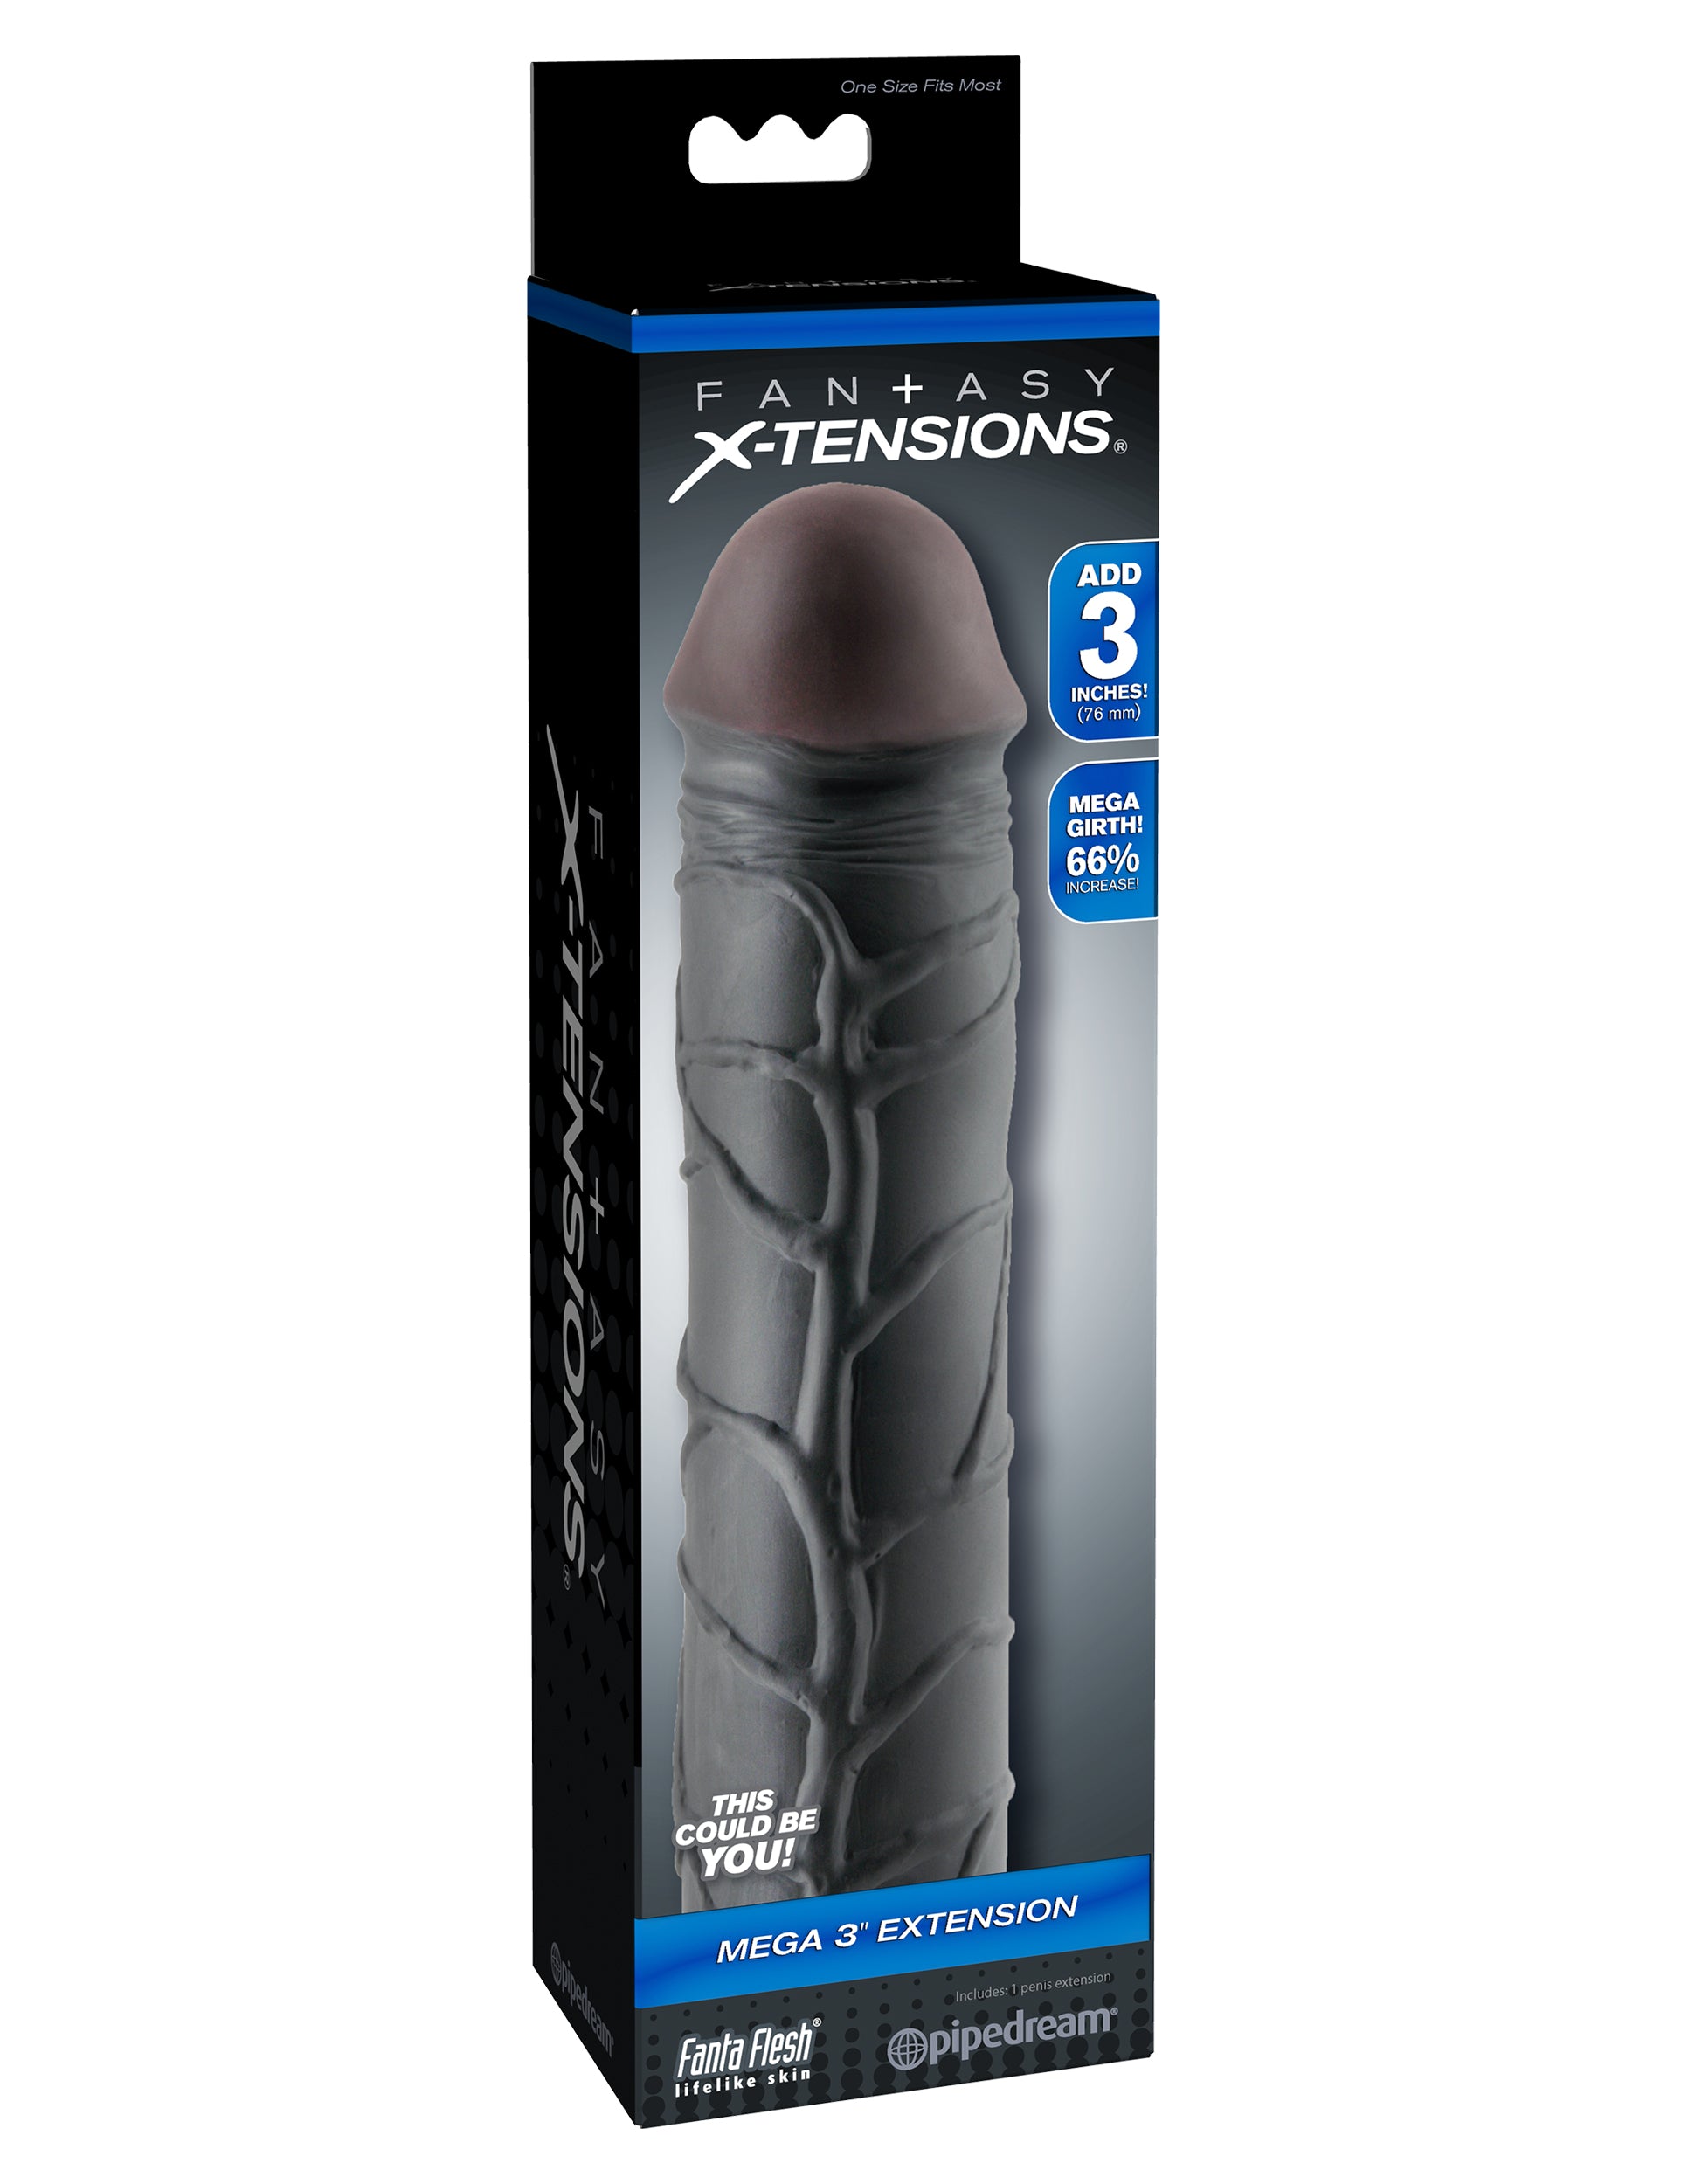 Introducing the Fantasy X-Tension Mega 3-Inch Extension - Experience the Ultimate Fulfillment